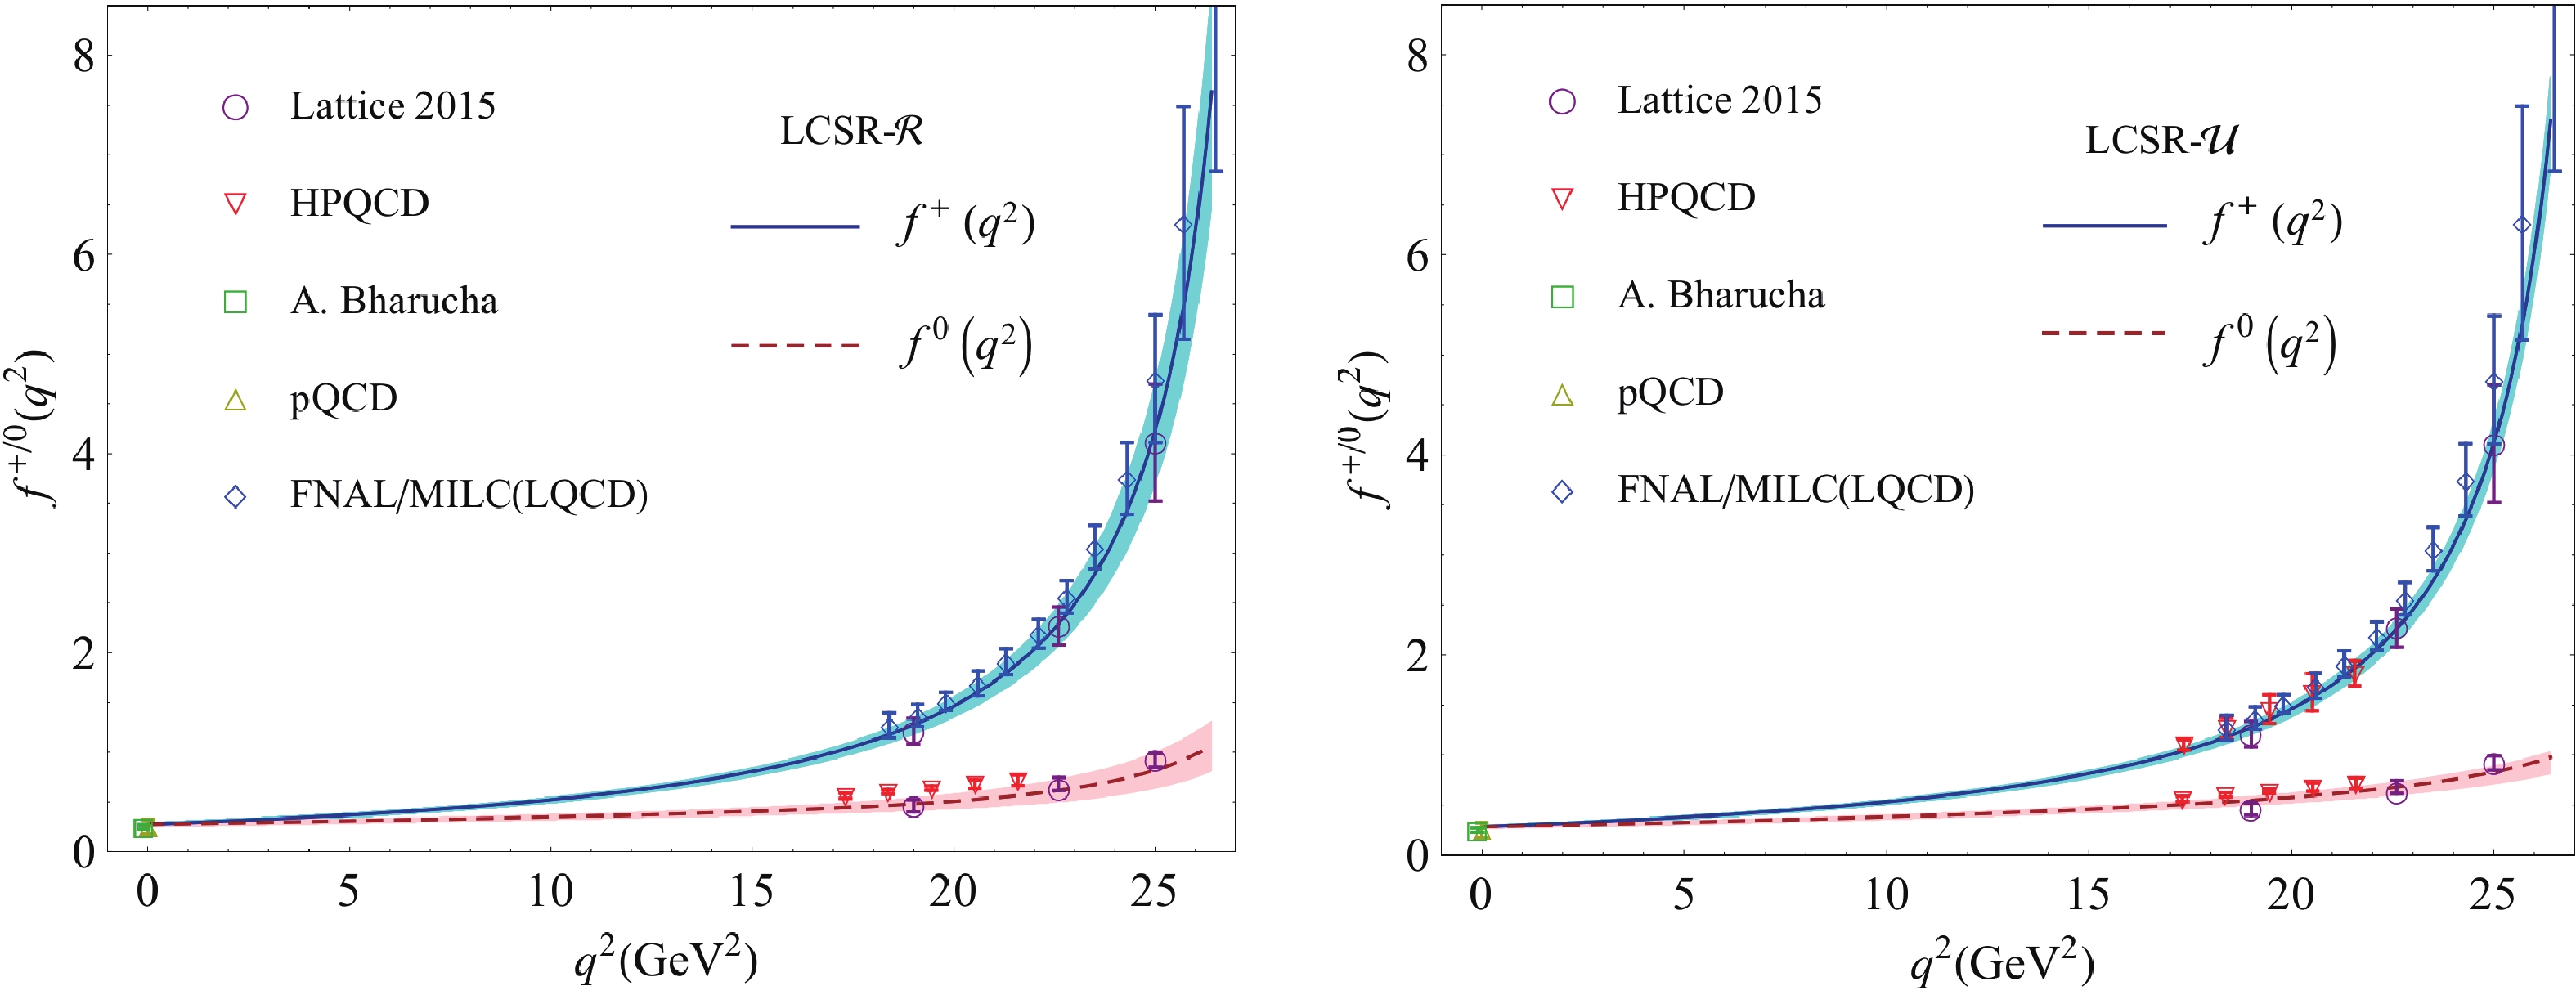 (color online) The extrapolated TFFs calculated using the two correlators LCSR-/(left/right plots). The shaded bands are the uncertainties from the error sources. As a comparison, the predictions of lattice QCD [7], LCSR [14, 15], pQCD [49] and HPQCD [50] are also shown.